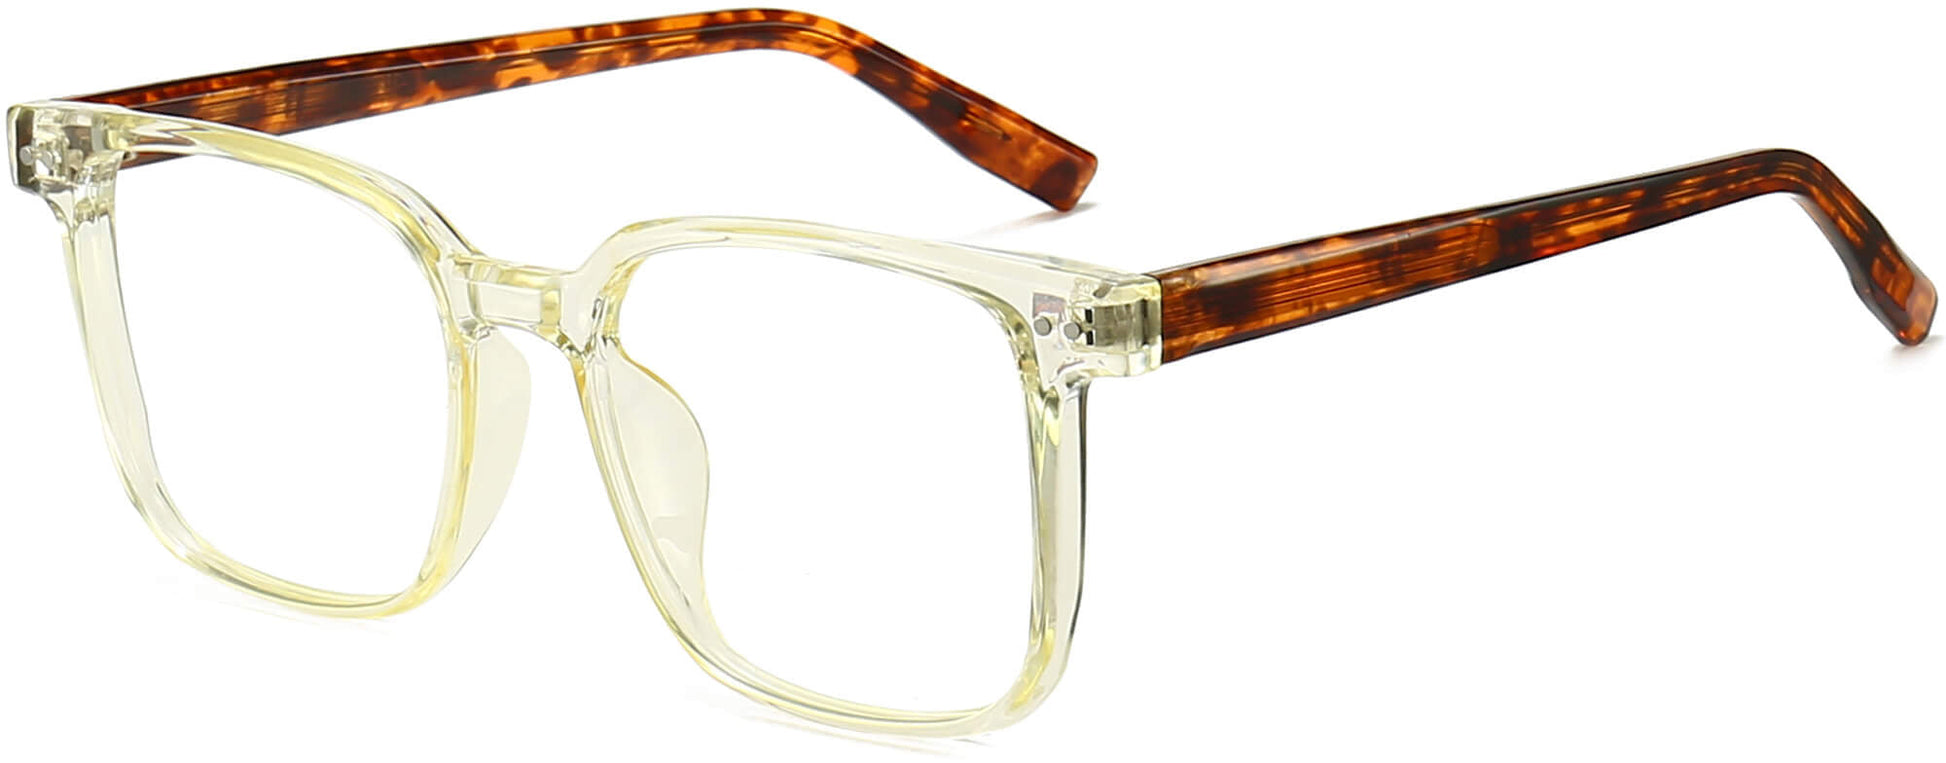 Siena Square Clear Eyeglasses from ANRRI, angle view